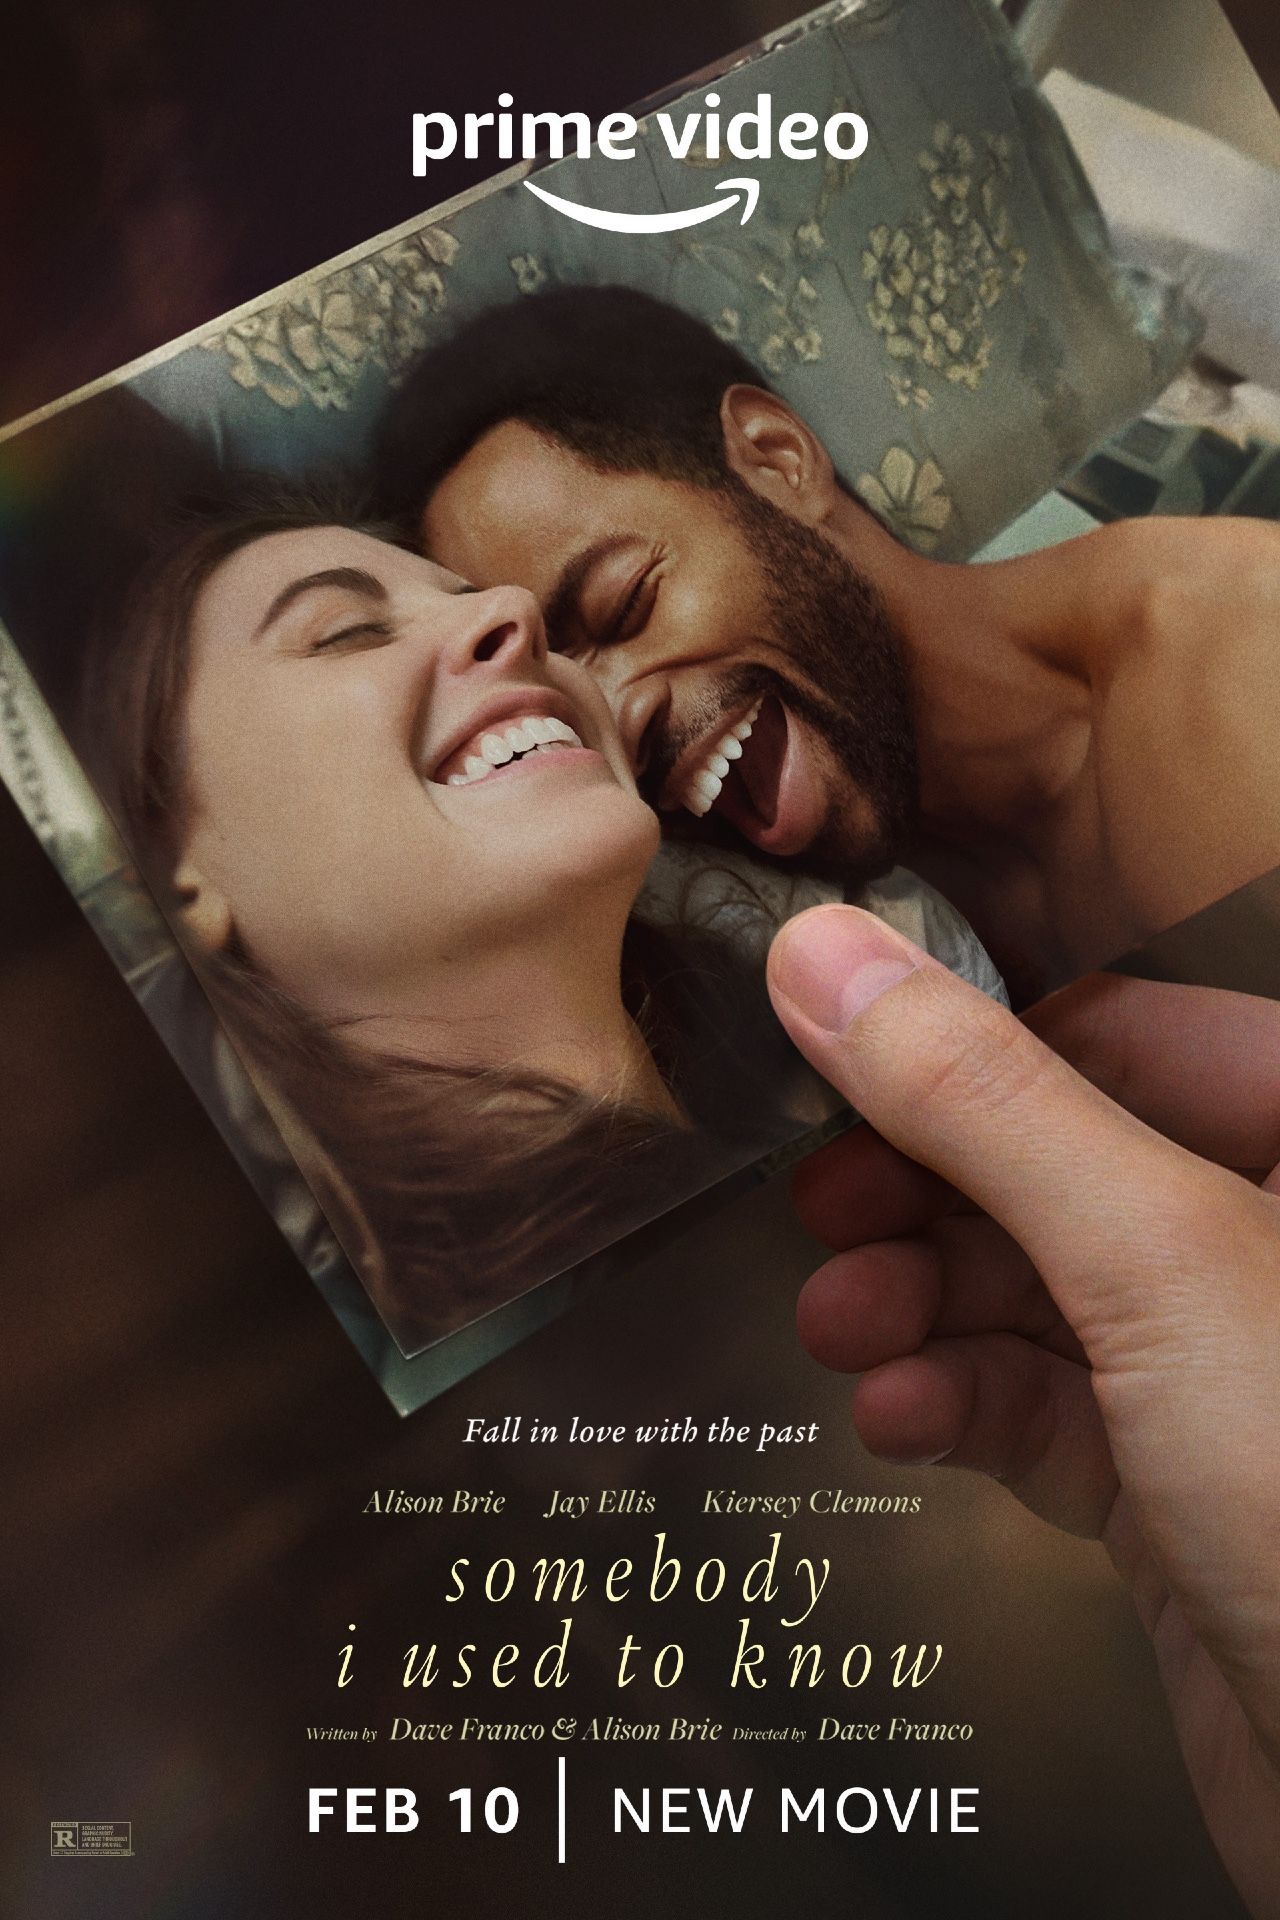 Somebody I used to know movie poster